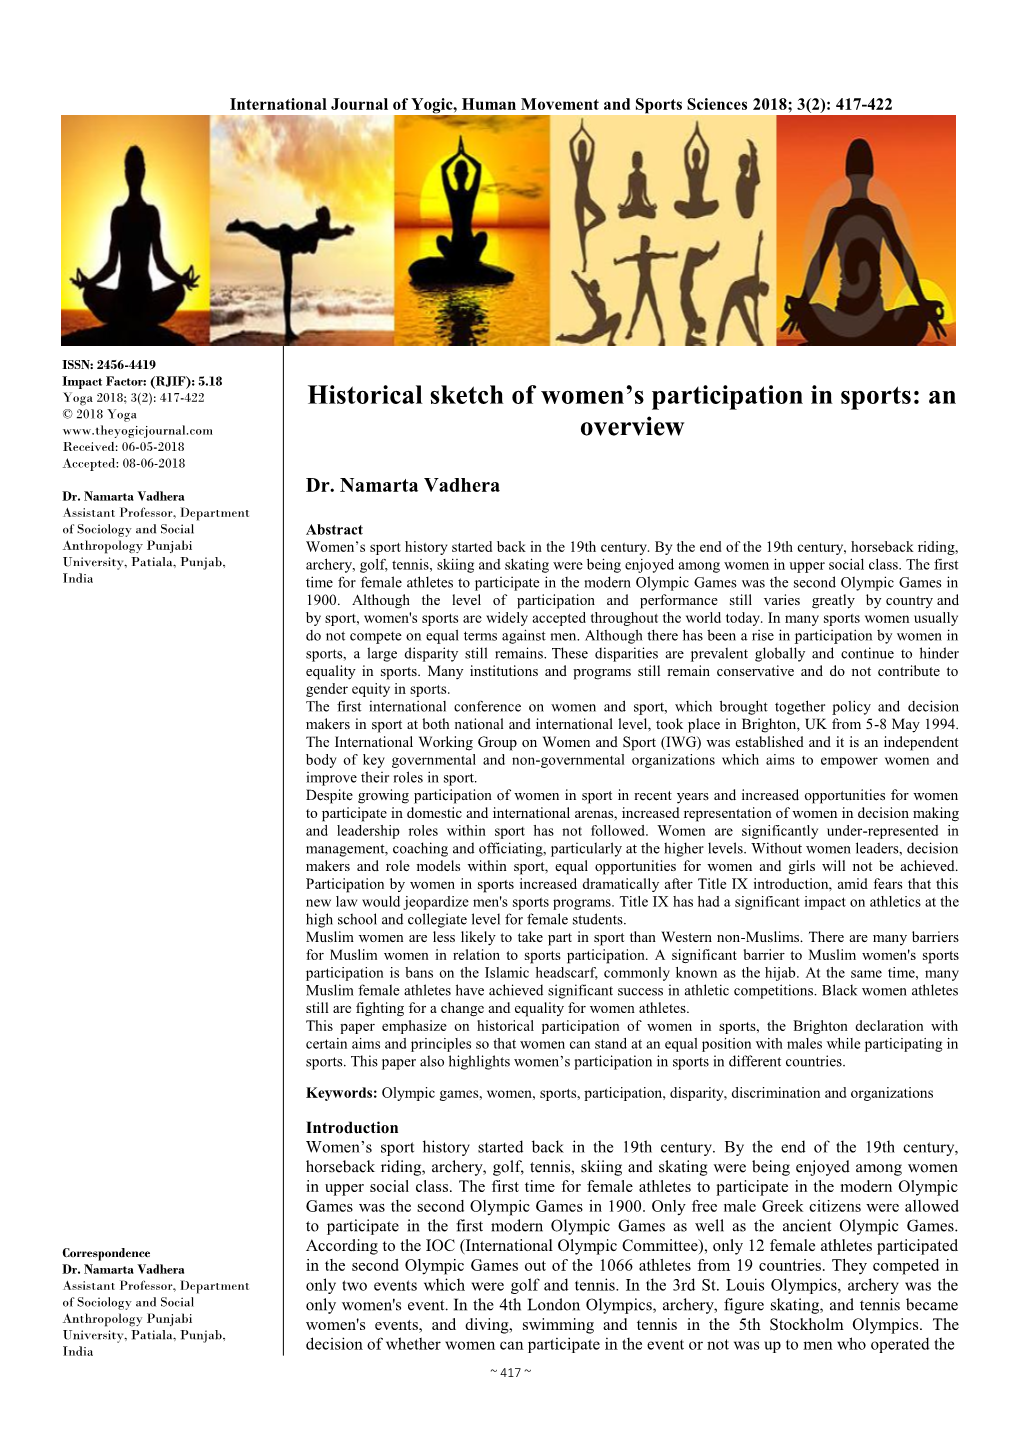 Historical Sketch of Women's Participation in Sports: an Overview